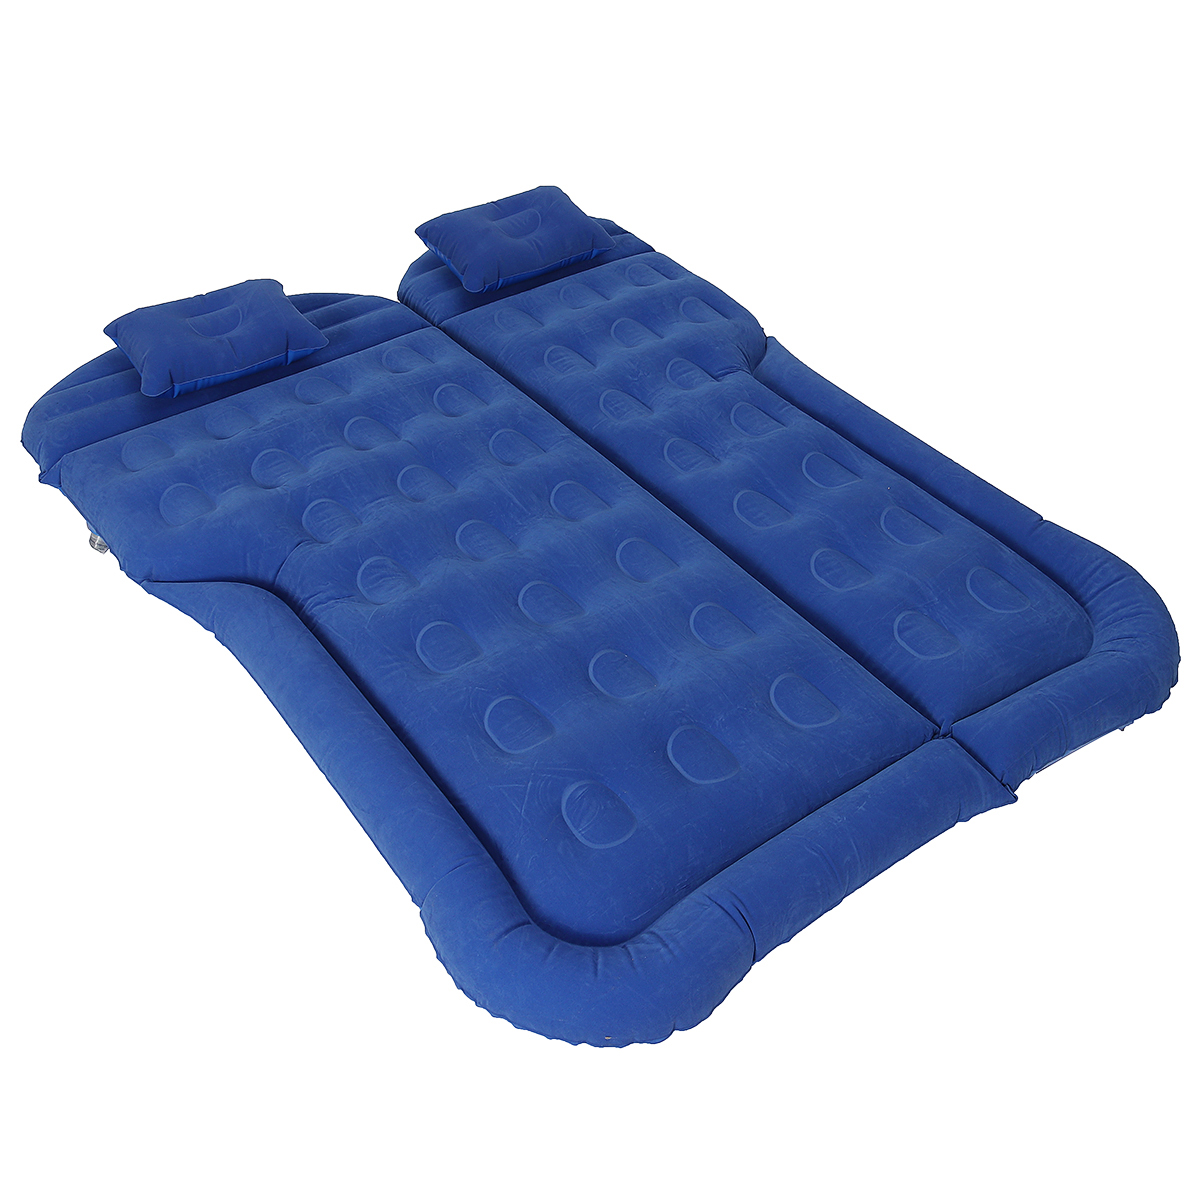 180x130cm-Multifunctional-Inflatable-Car-Air-Mattress-Durable-Back-Seat-Cover-Travel-Bed-Moisture-pr-1888970-11